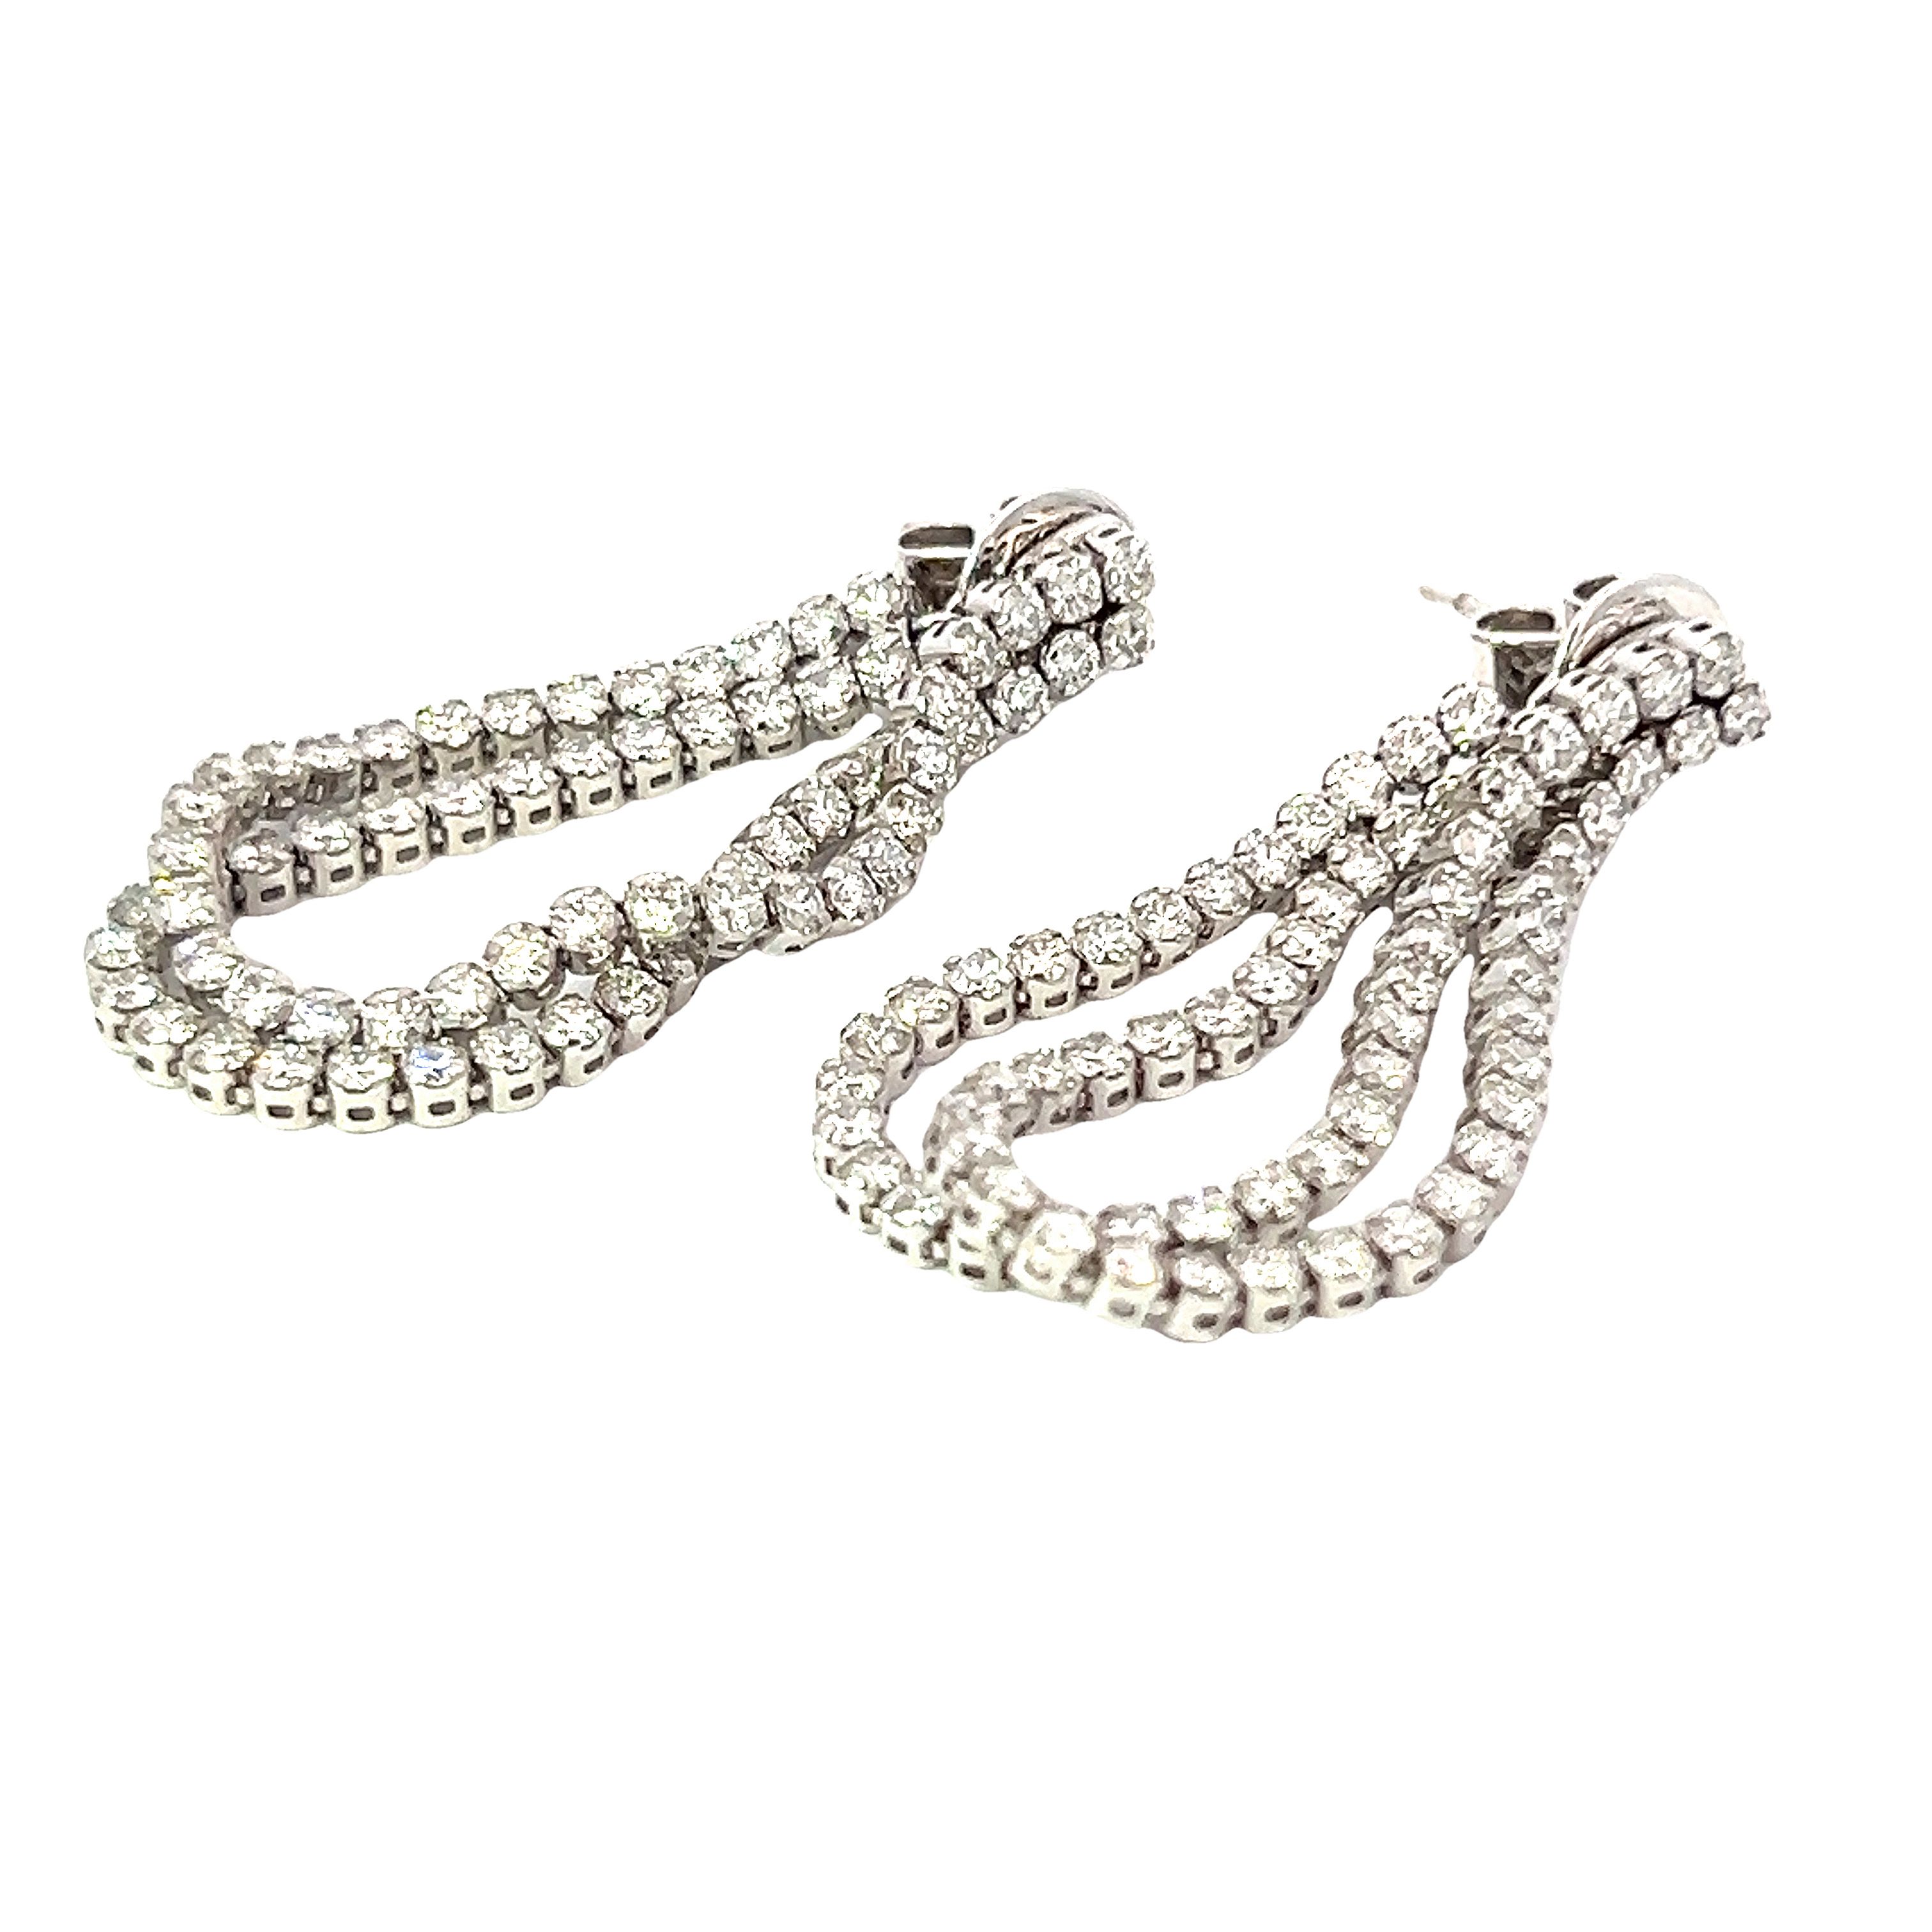 18 Carat White Gold and Diamond Chain Drop Earrings